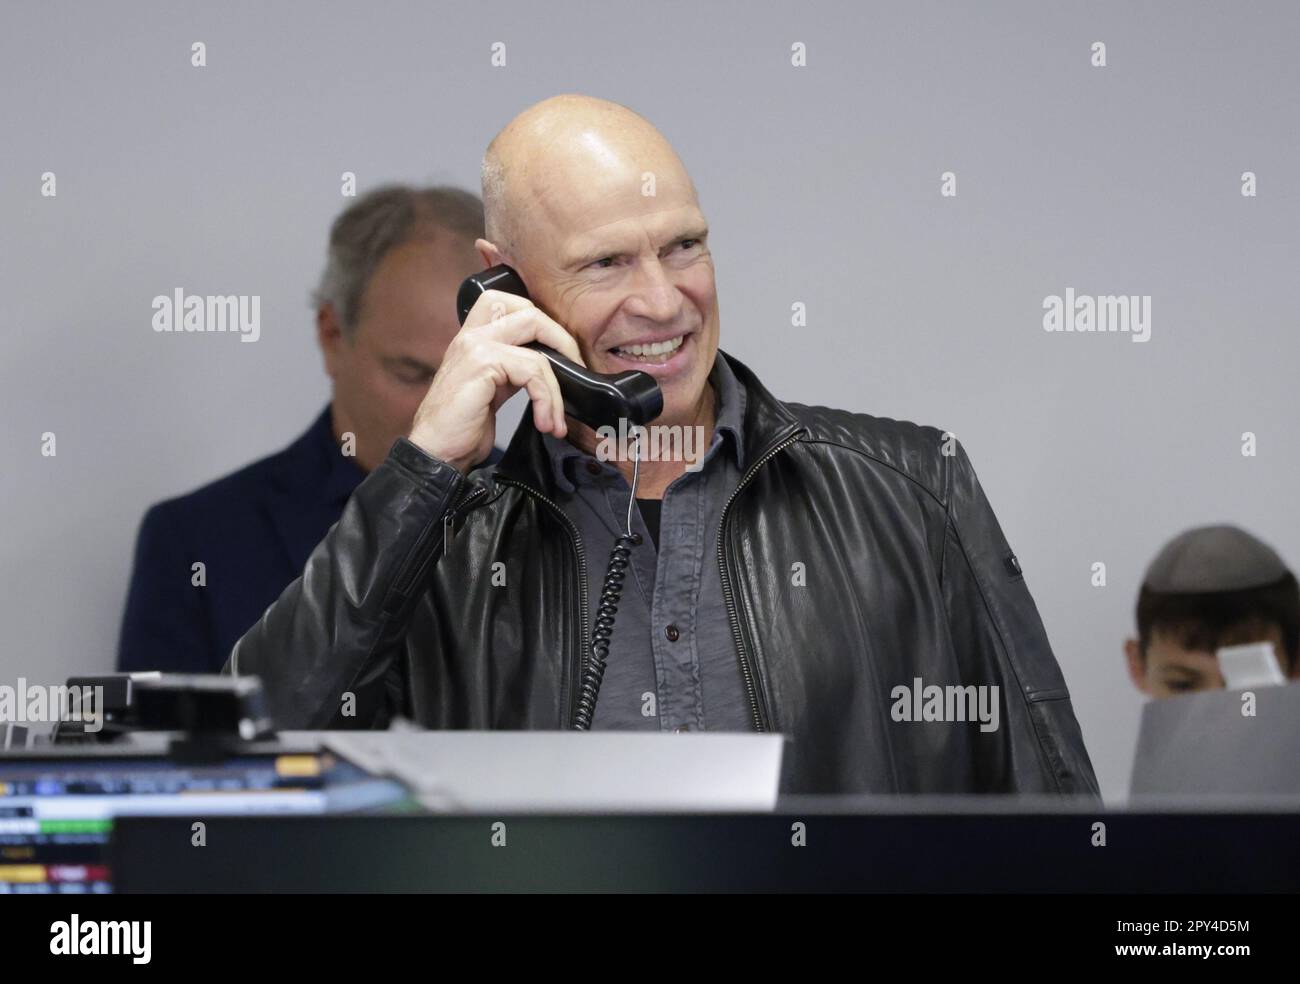 Mark messier and kim messier hi-res stock photography and images - Alamy